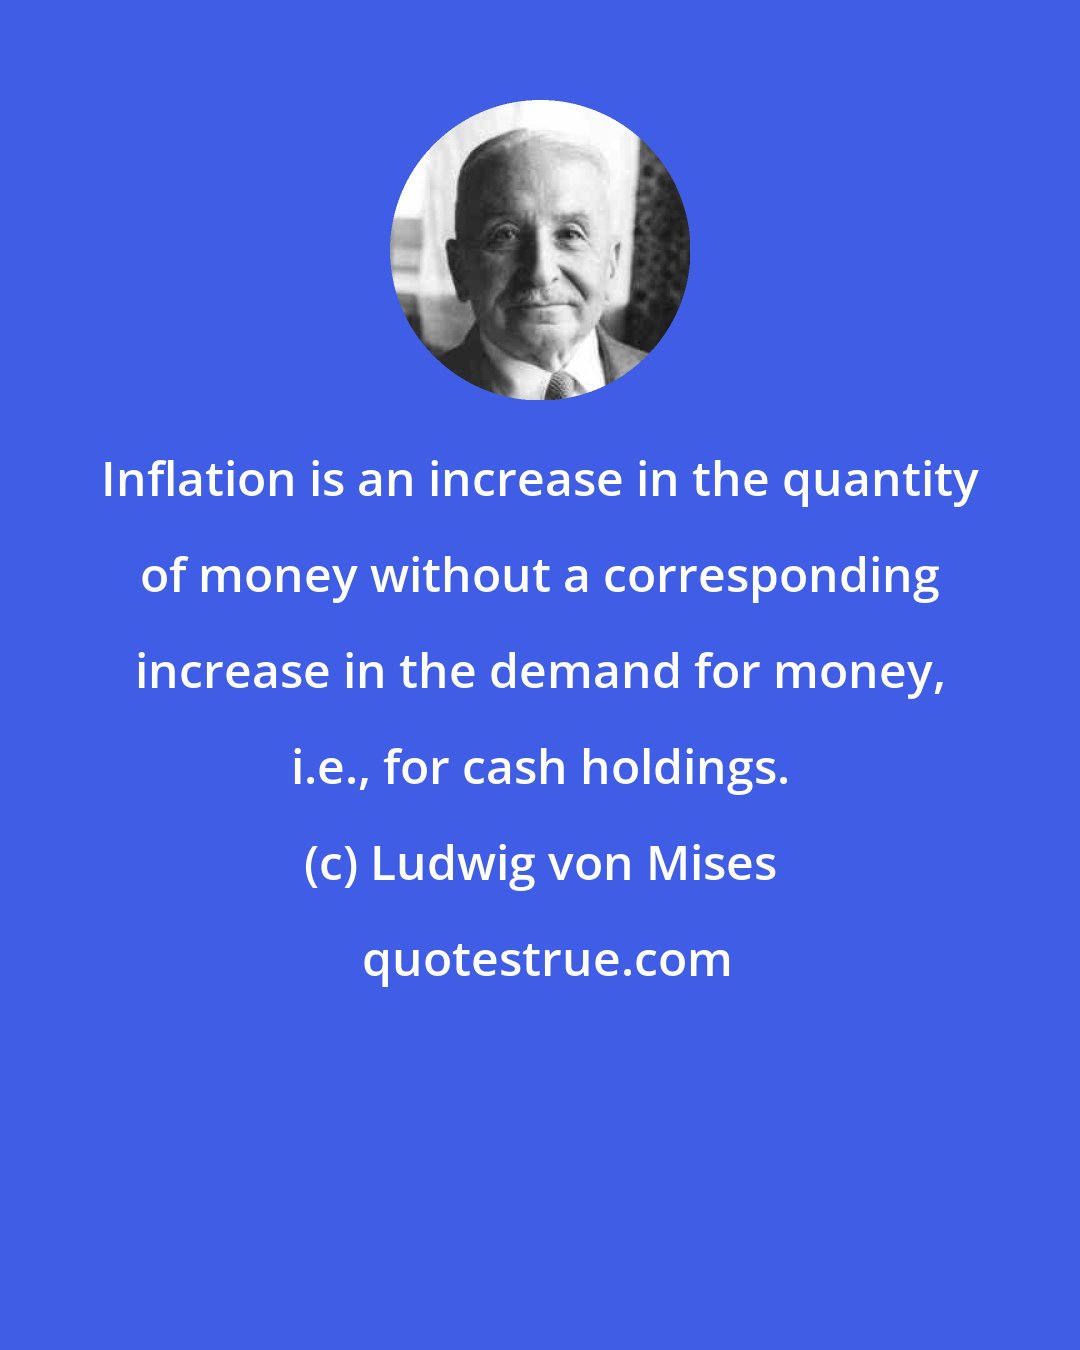 Ludwig von Mises: Inflation is an increase in the quantity of money without a corresponding increase in the demand for money, i.e., for cash holdings.